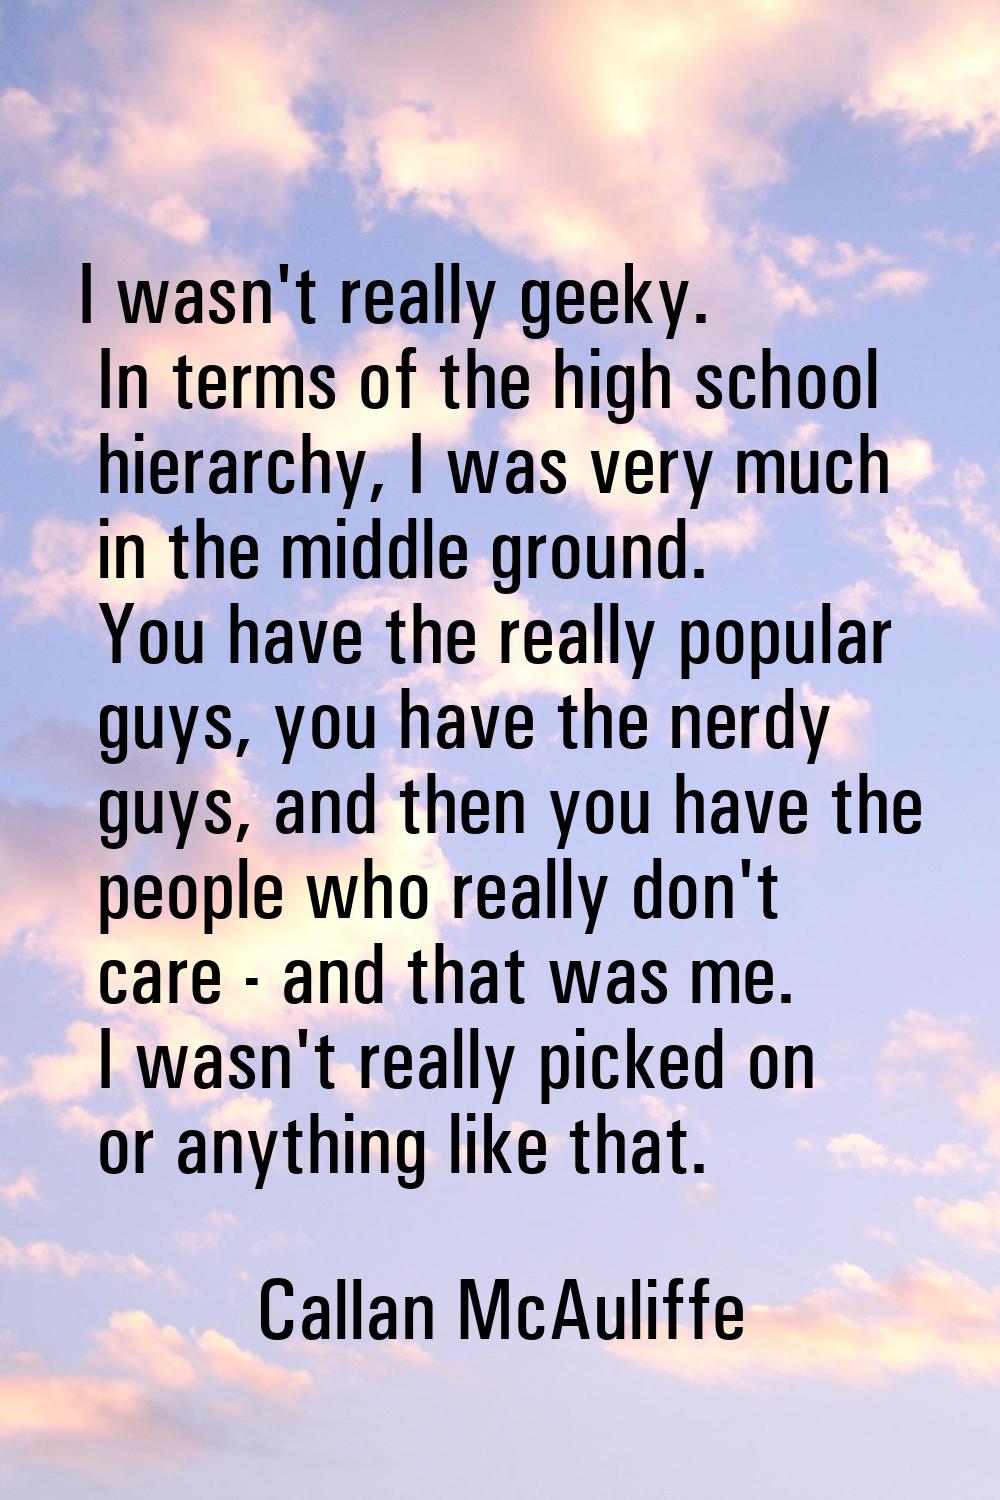 I wasn't really geeky. In terms of the high school hierarchy, I was very much in the middle ground.